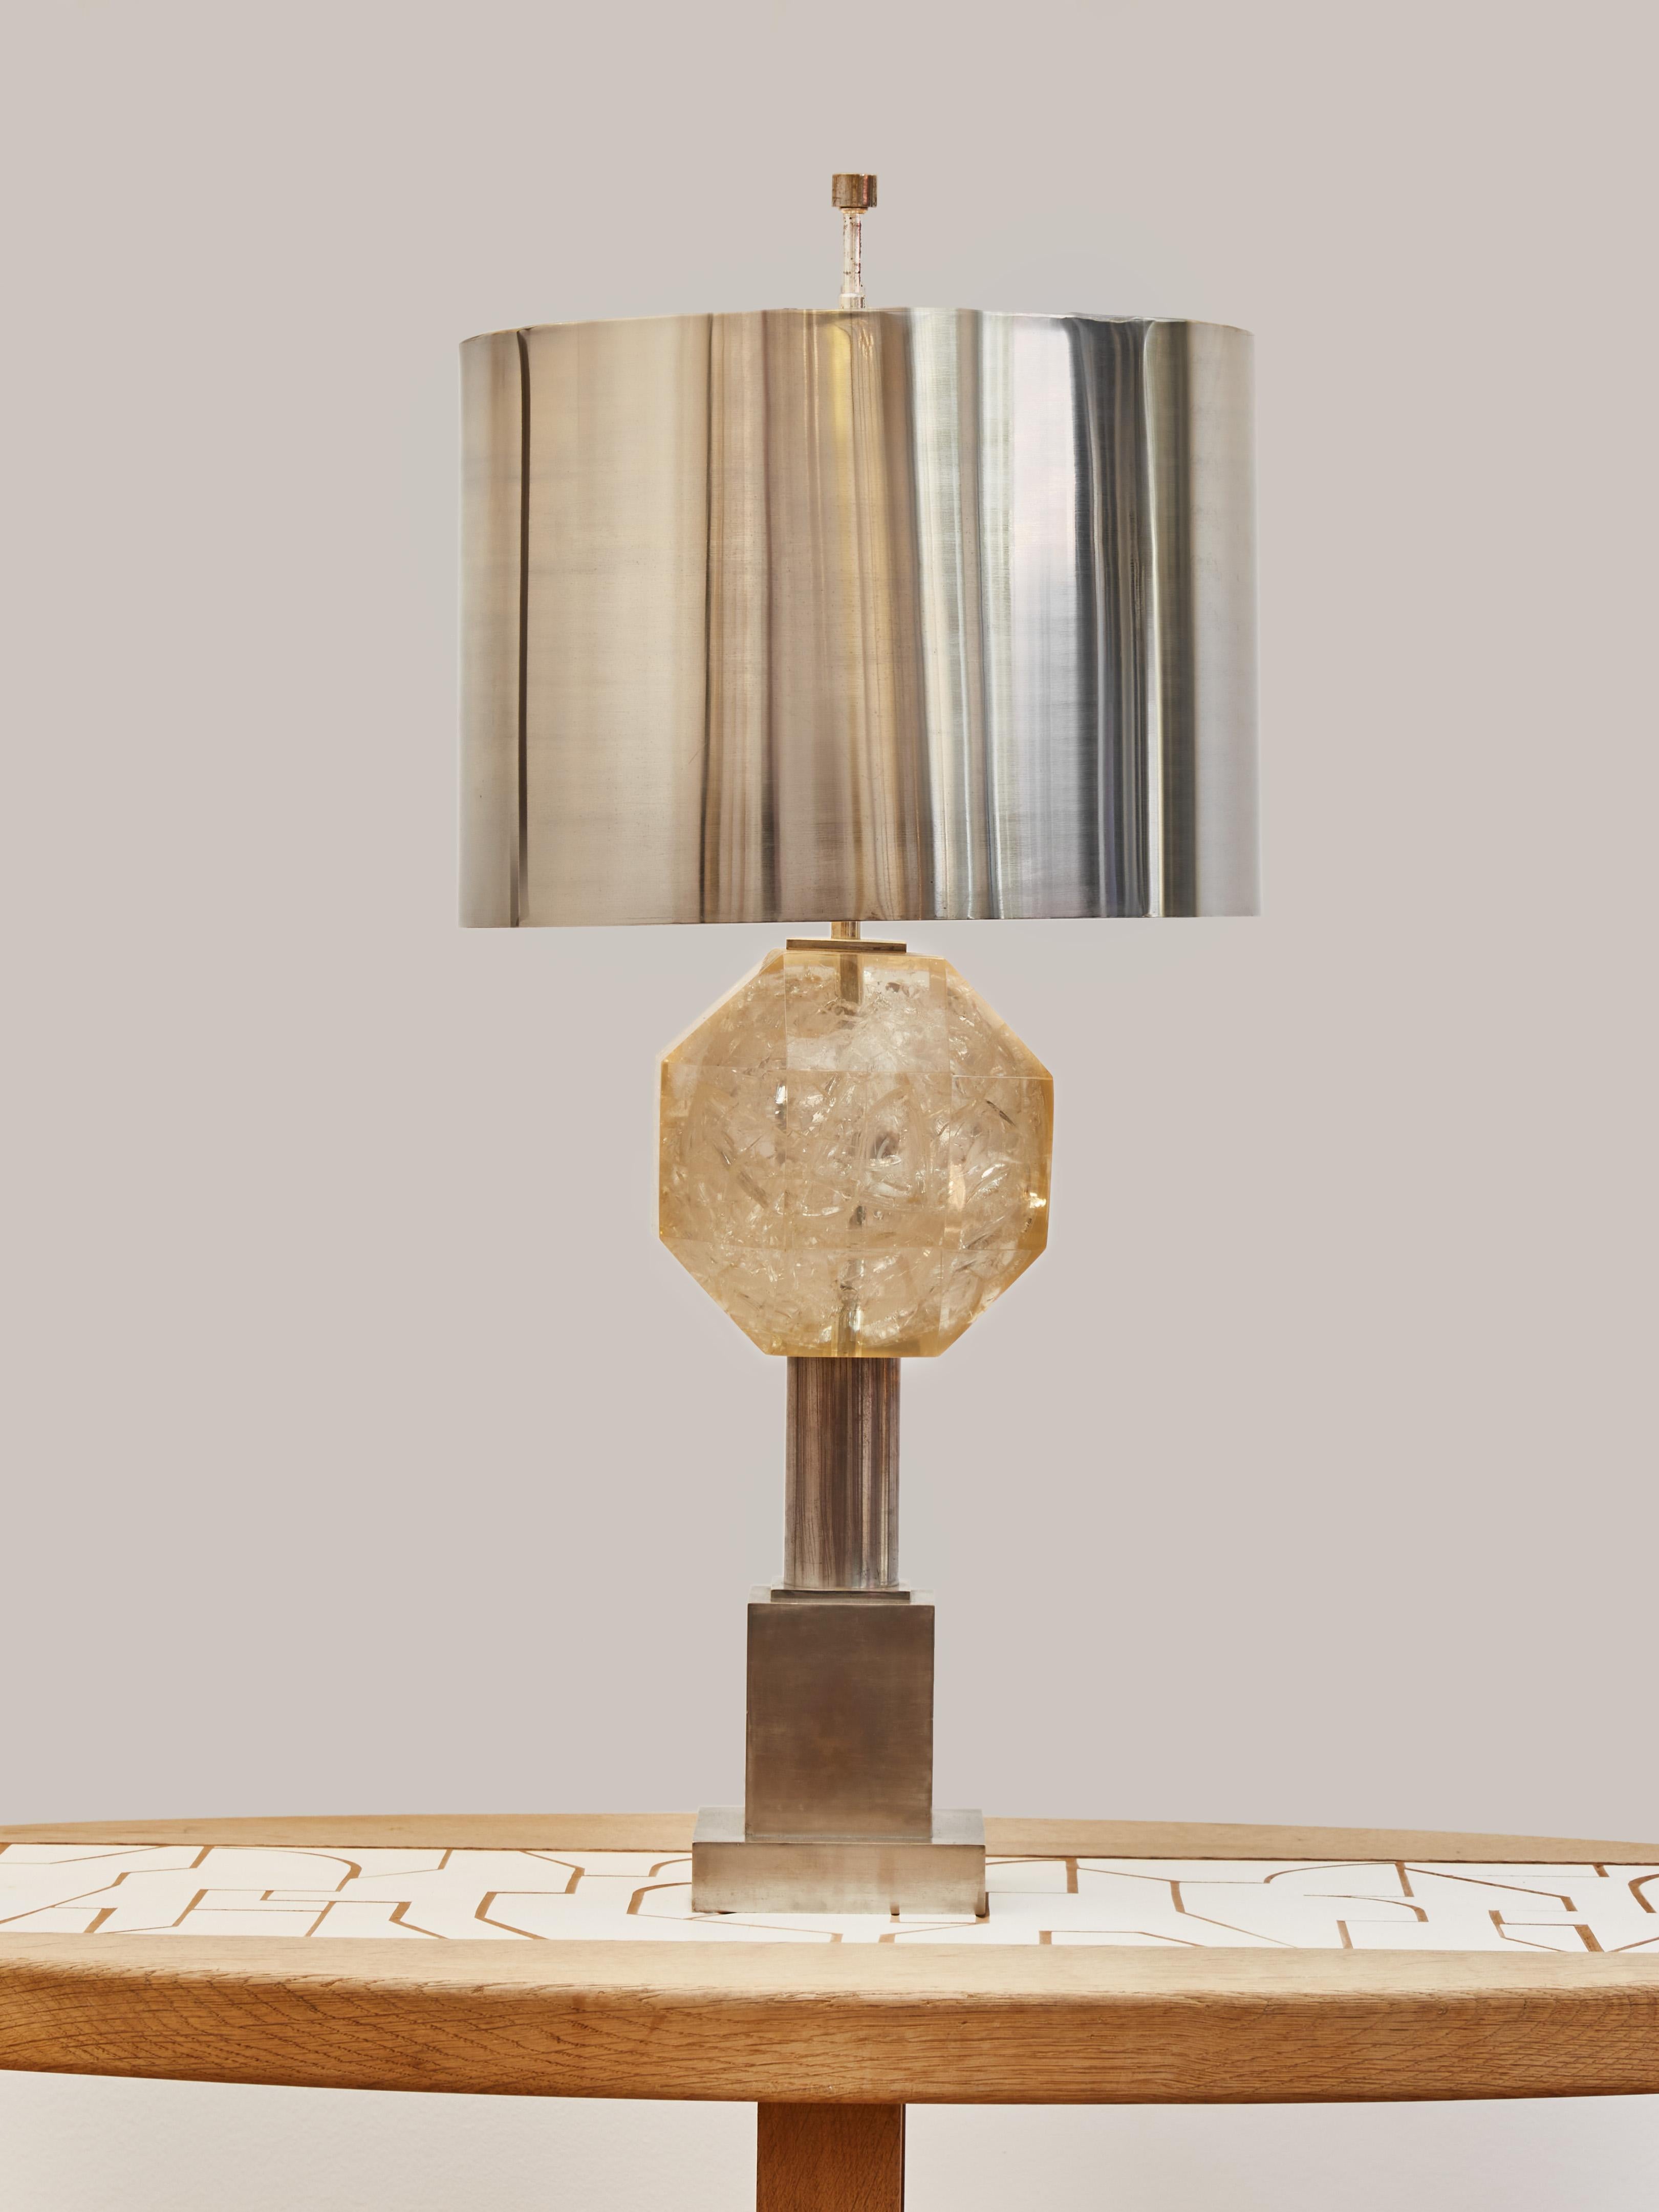 Beautiful example of the French maker Maison Charles savoir faire, this table lamp combines the traditional bronze use and the more modern fractal resin, used here as the centerpiece. 

Vintage piece from the 1970s.

Original bronze shade and